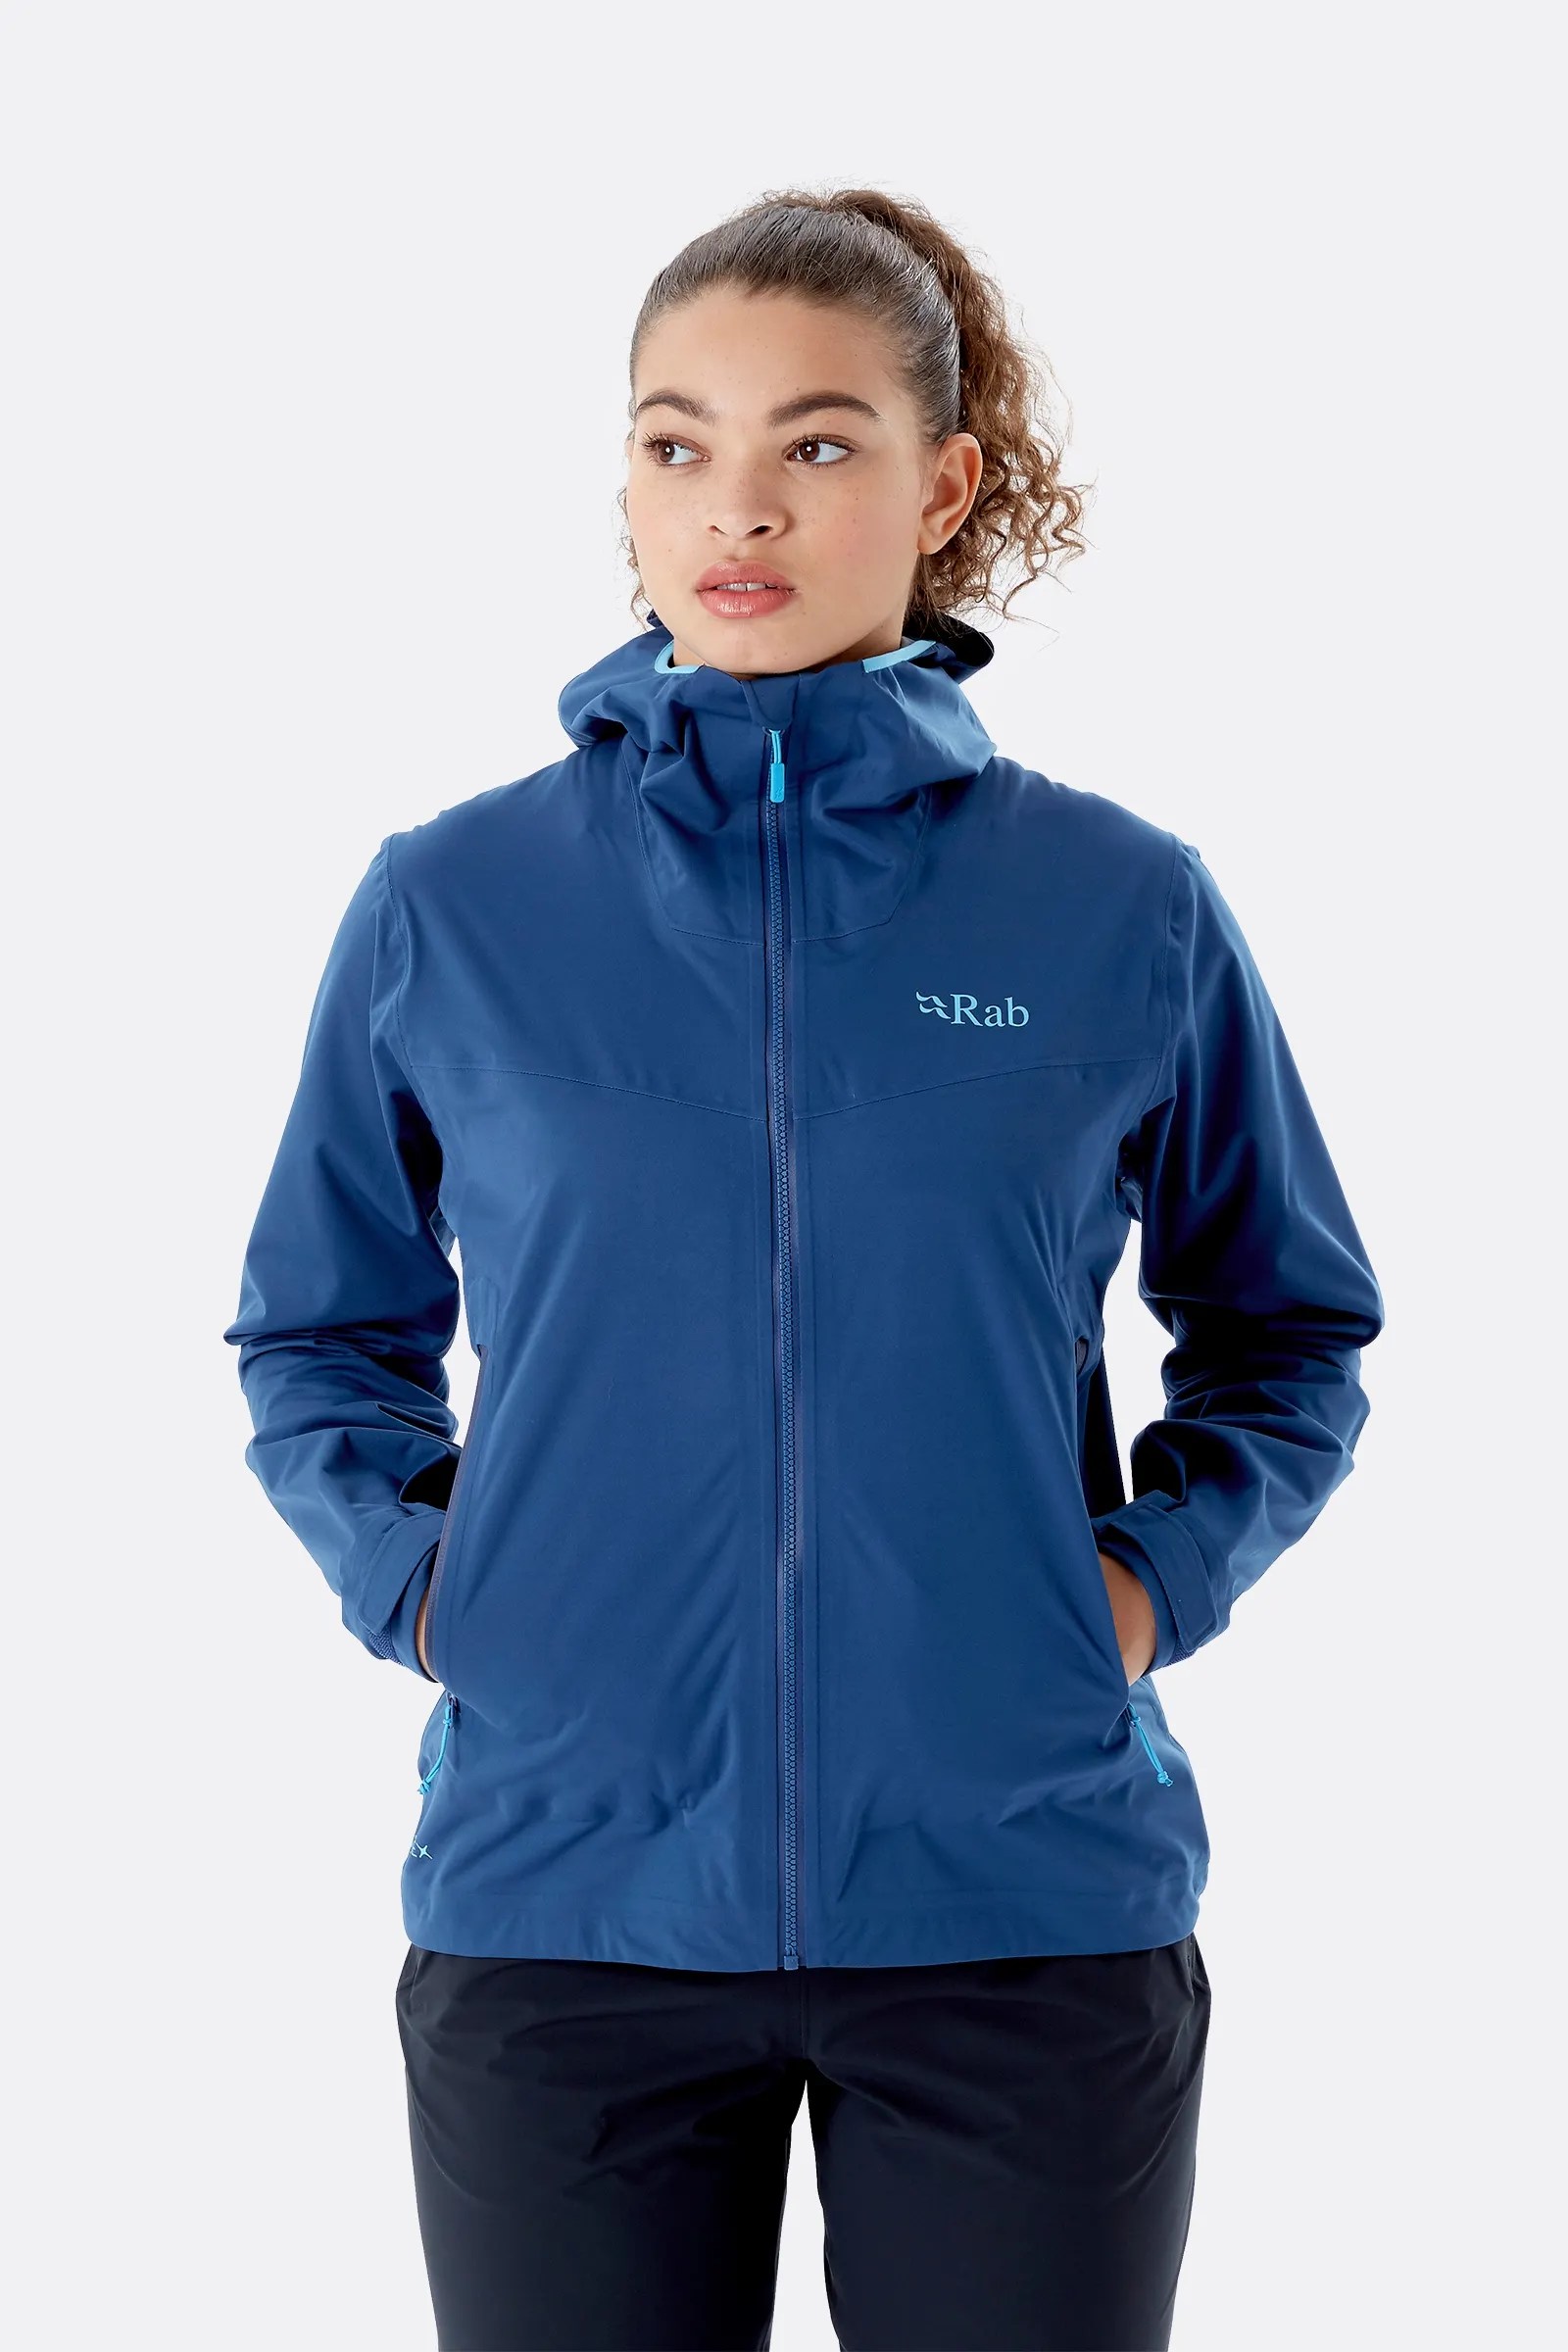 9 Best Women's Soft Shell Jackets to Keep You Warm | Well+Good